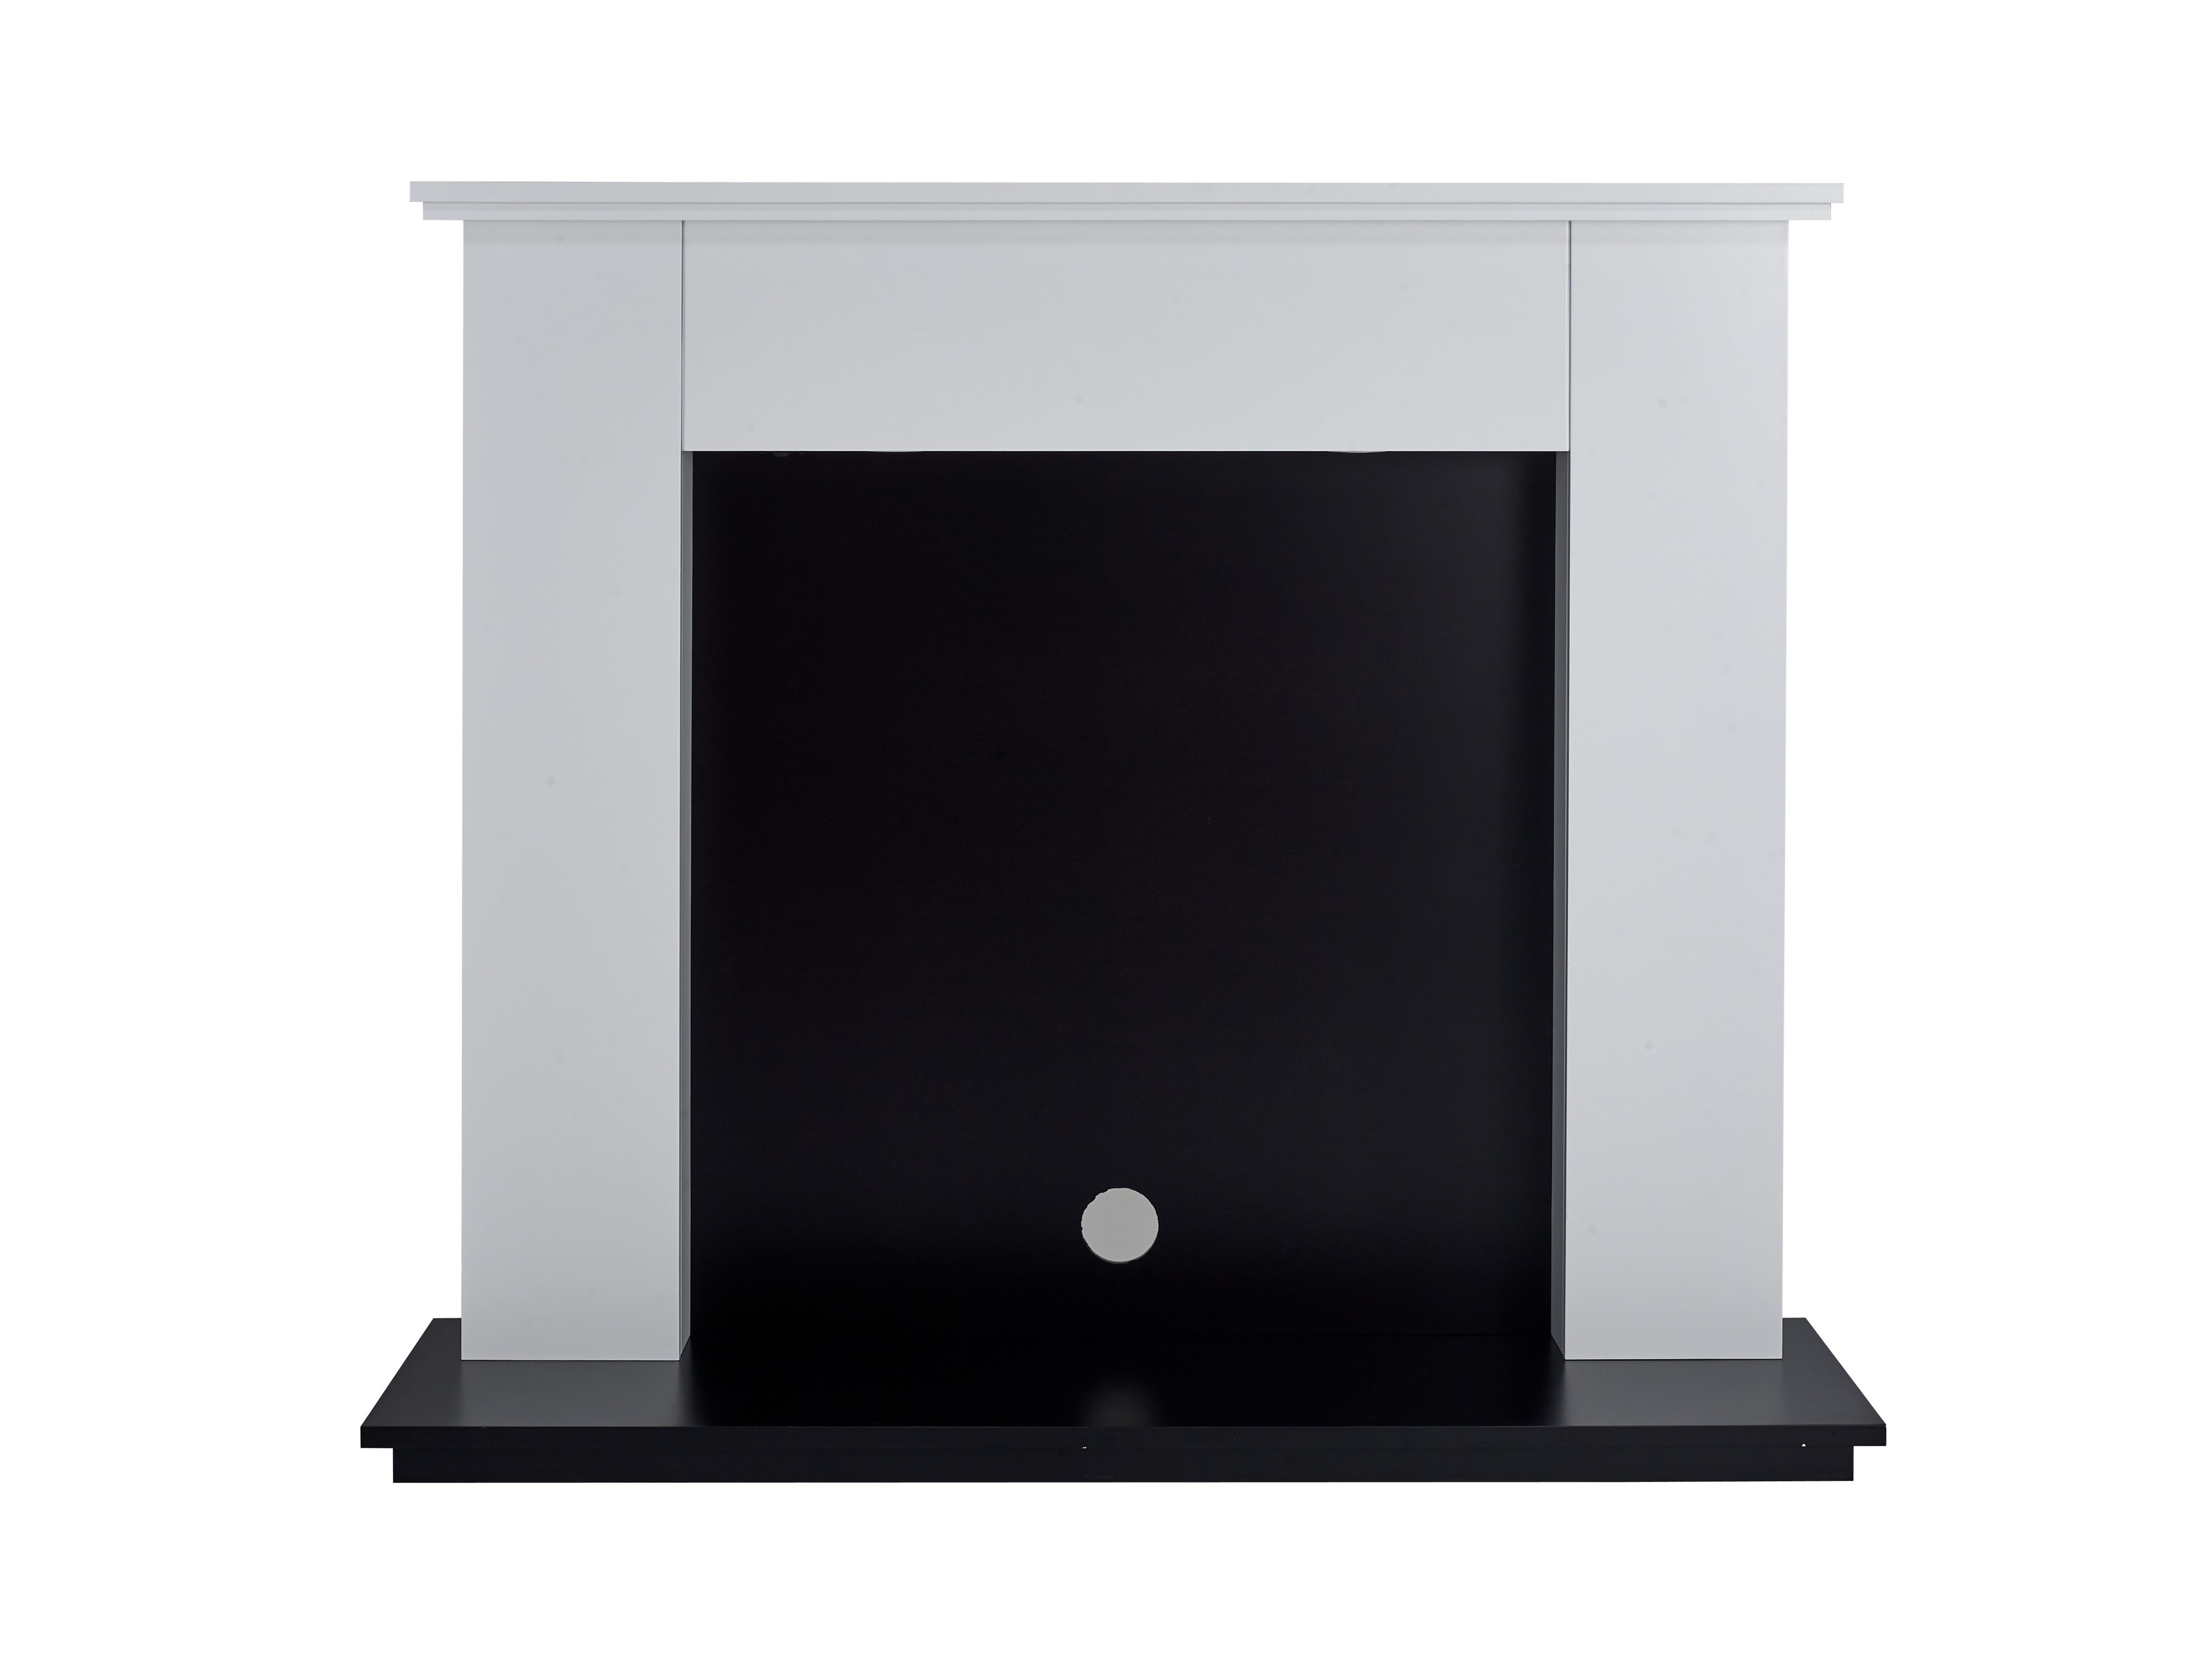 Focal Point Lashenden White & Black Fire surround set with Lights included